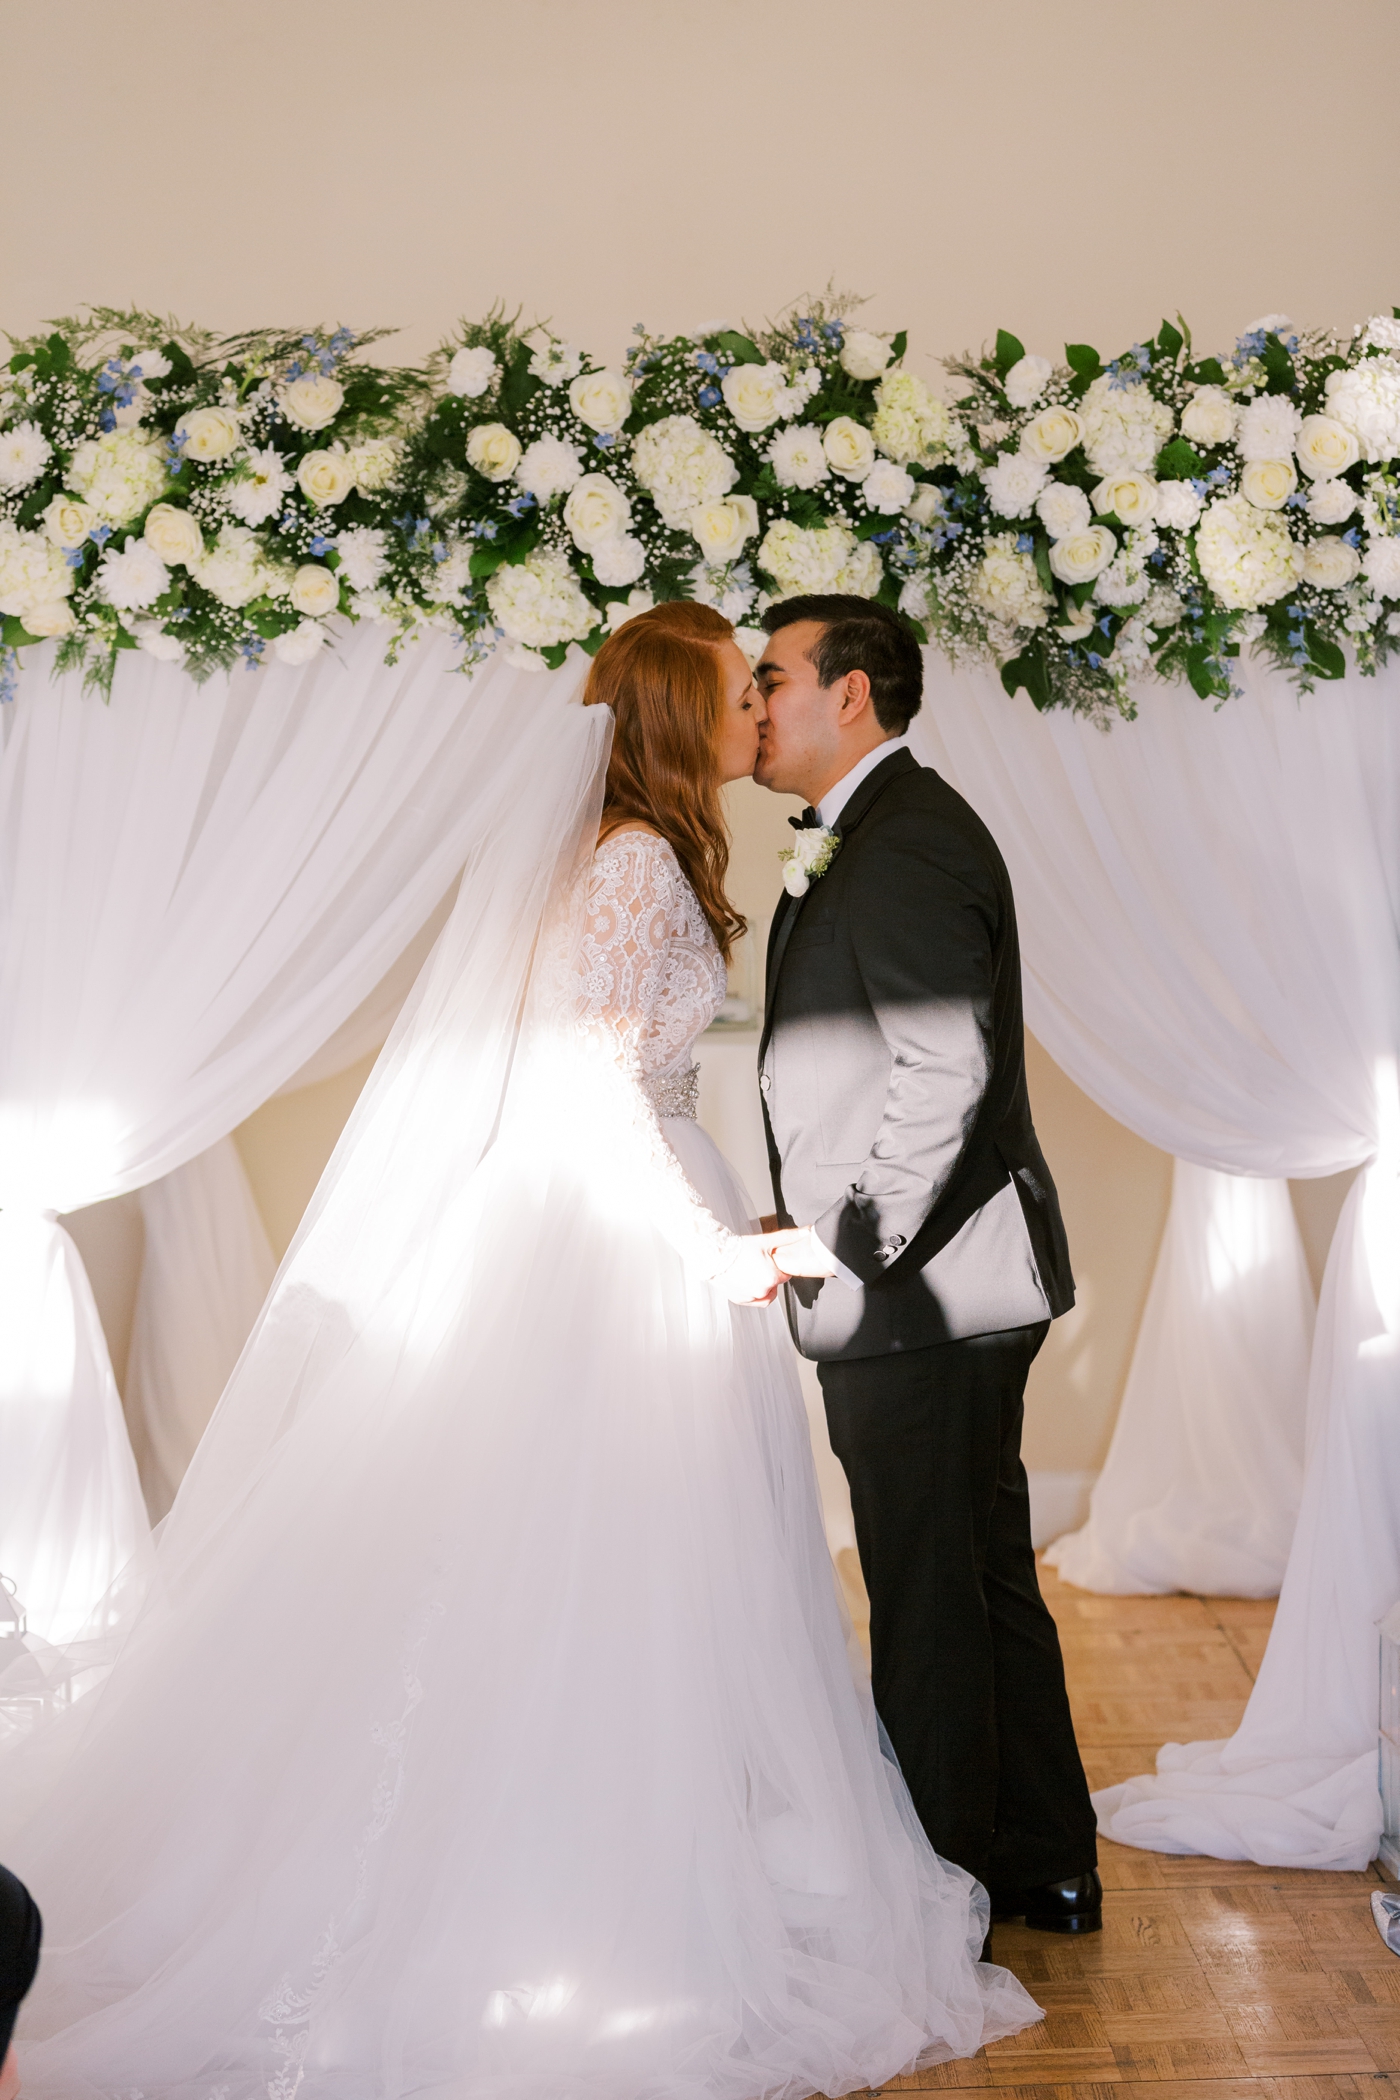 First kiss at indoor wedding ceremony